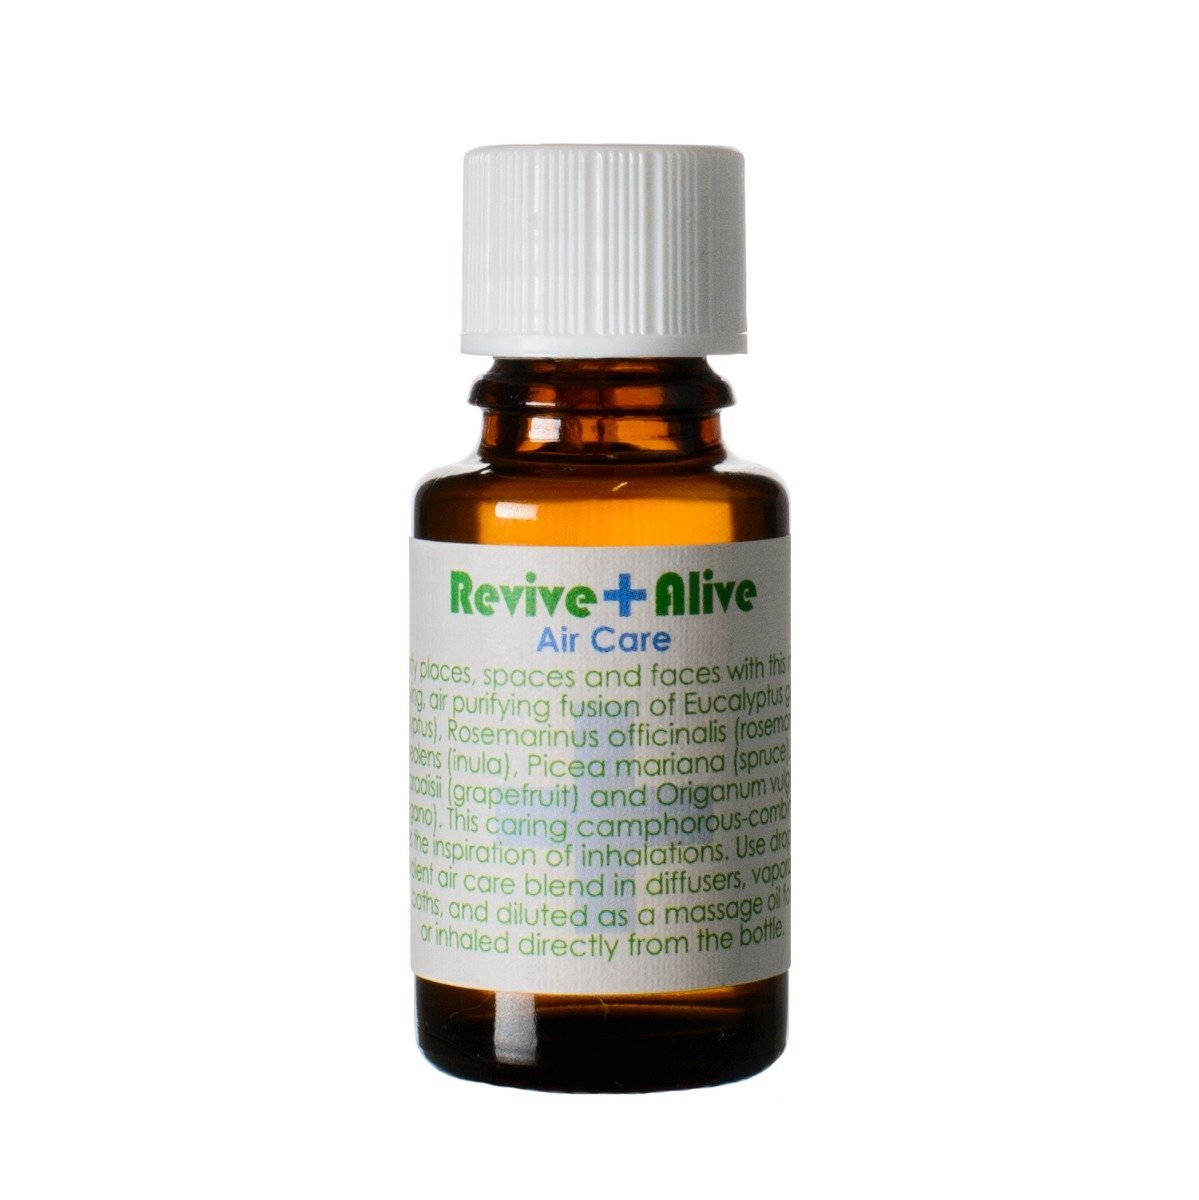 Revive Alive Air Care